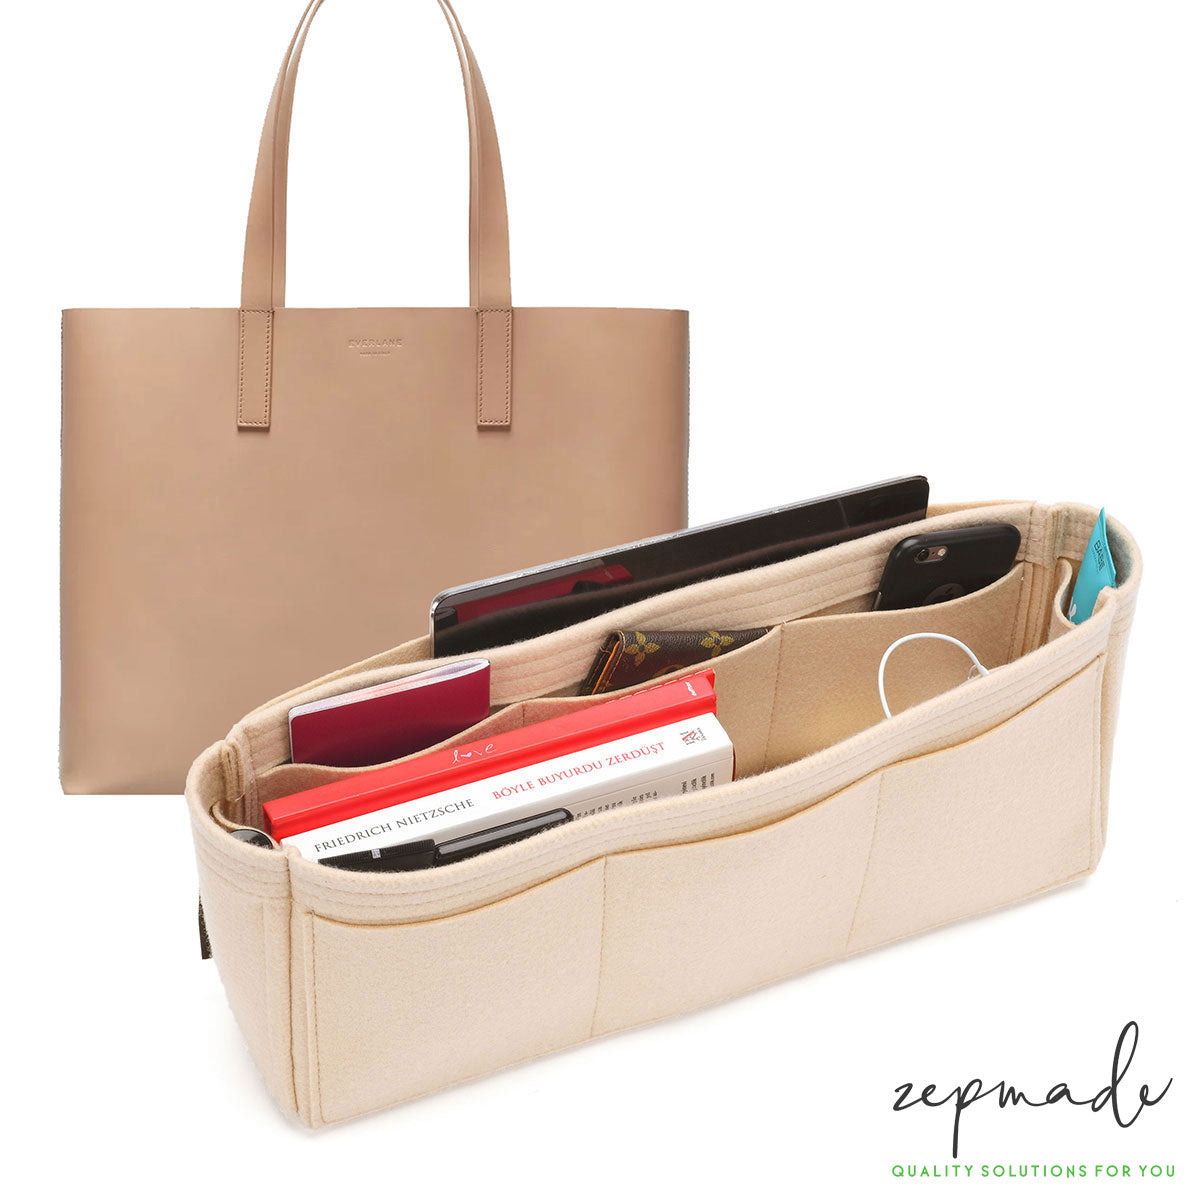 Vegan Leather Tote Bag Organizer Insert with Laptop Compartment